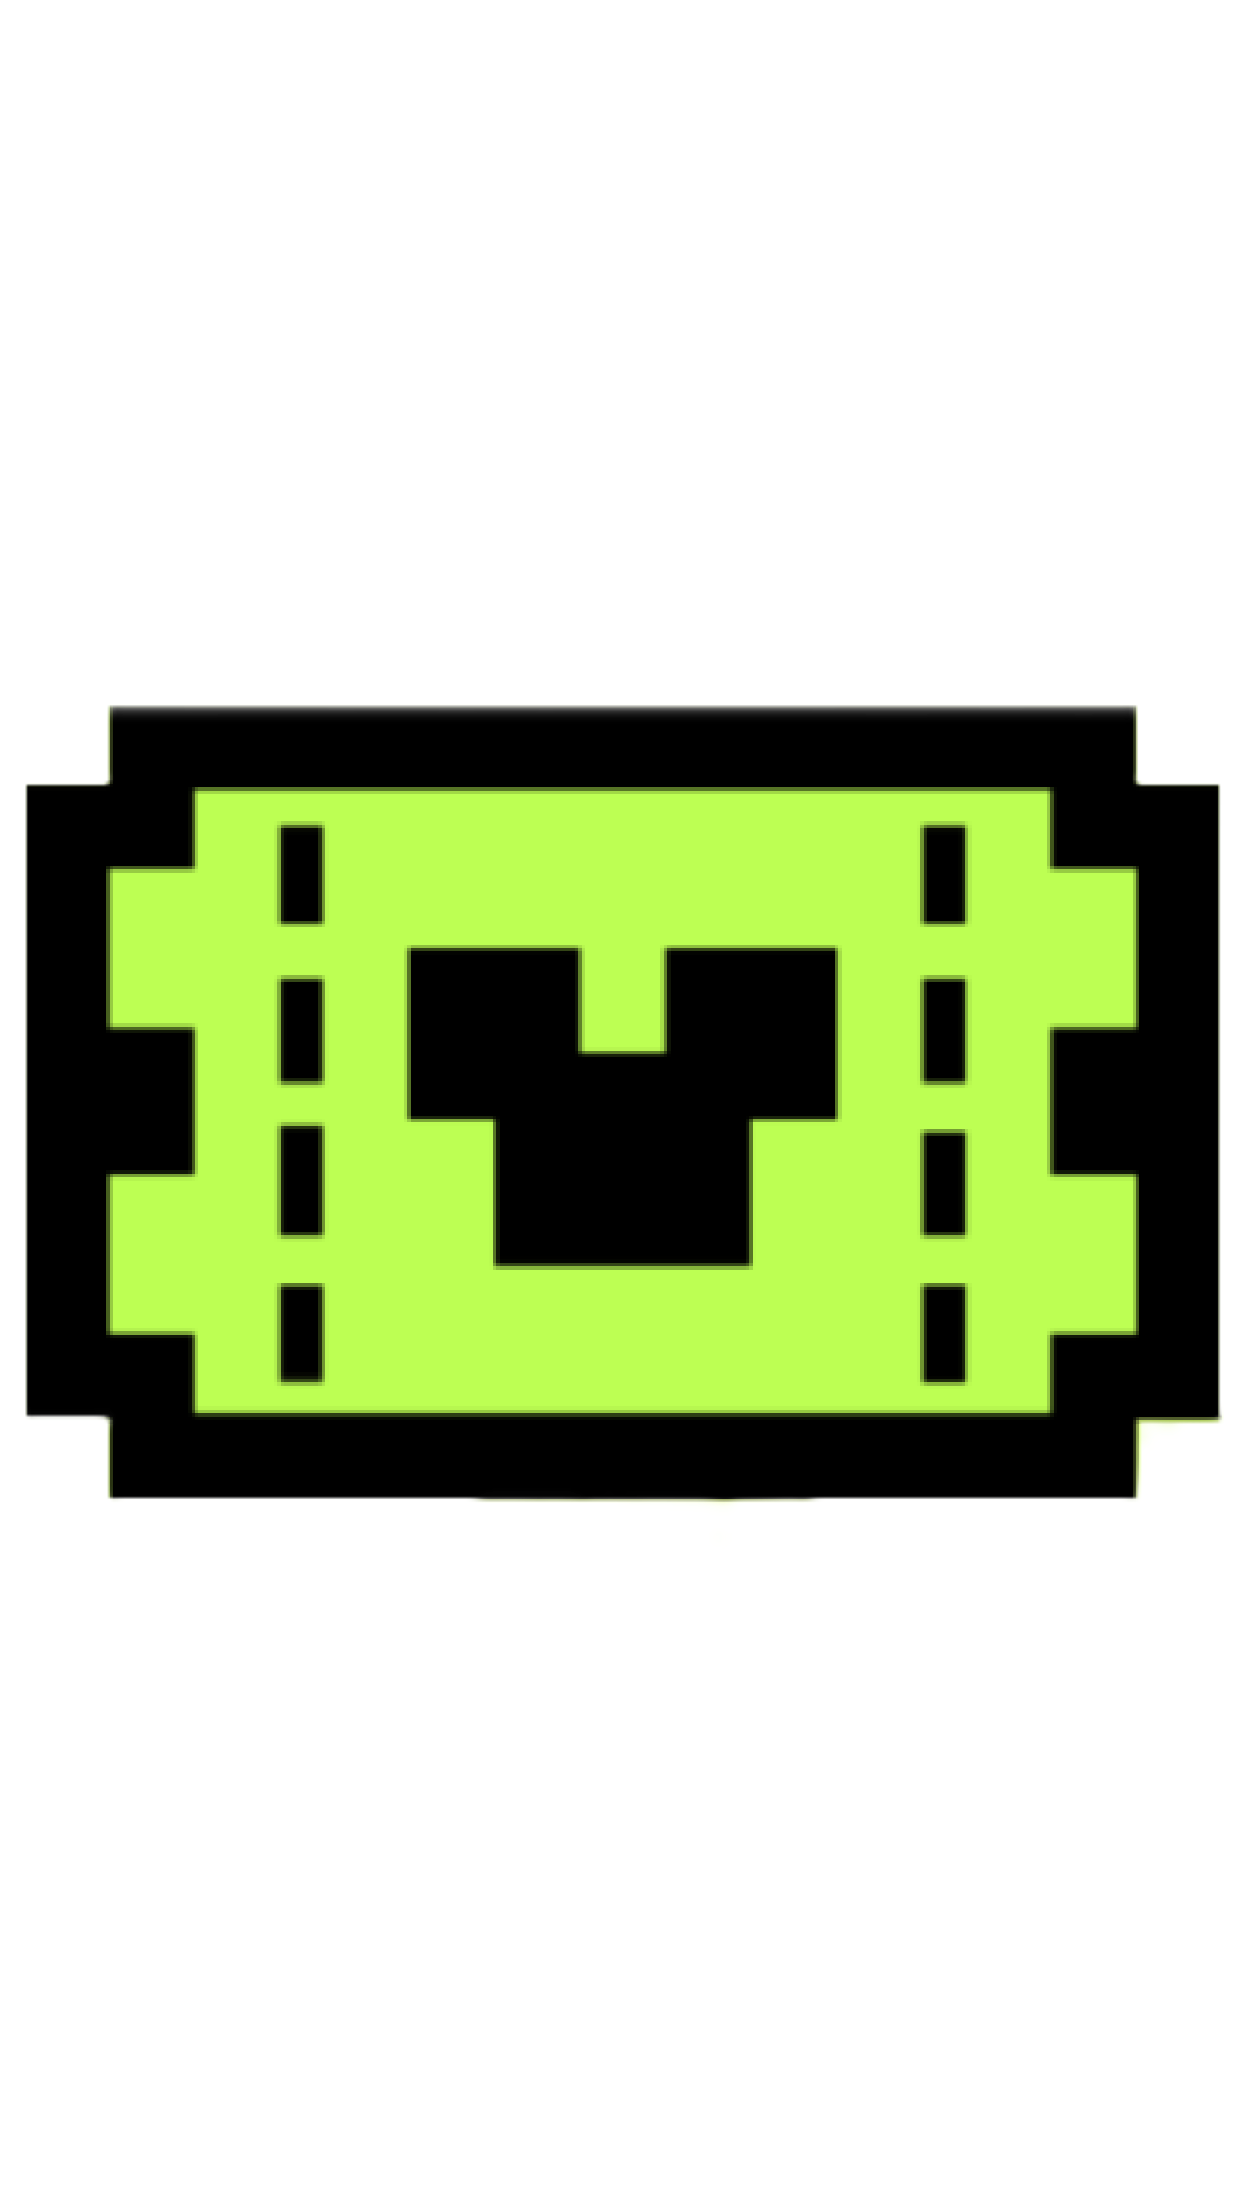 Minecraft Creeper Video game Fan art Character, chewbacca, game, video Game  png